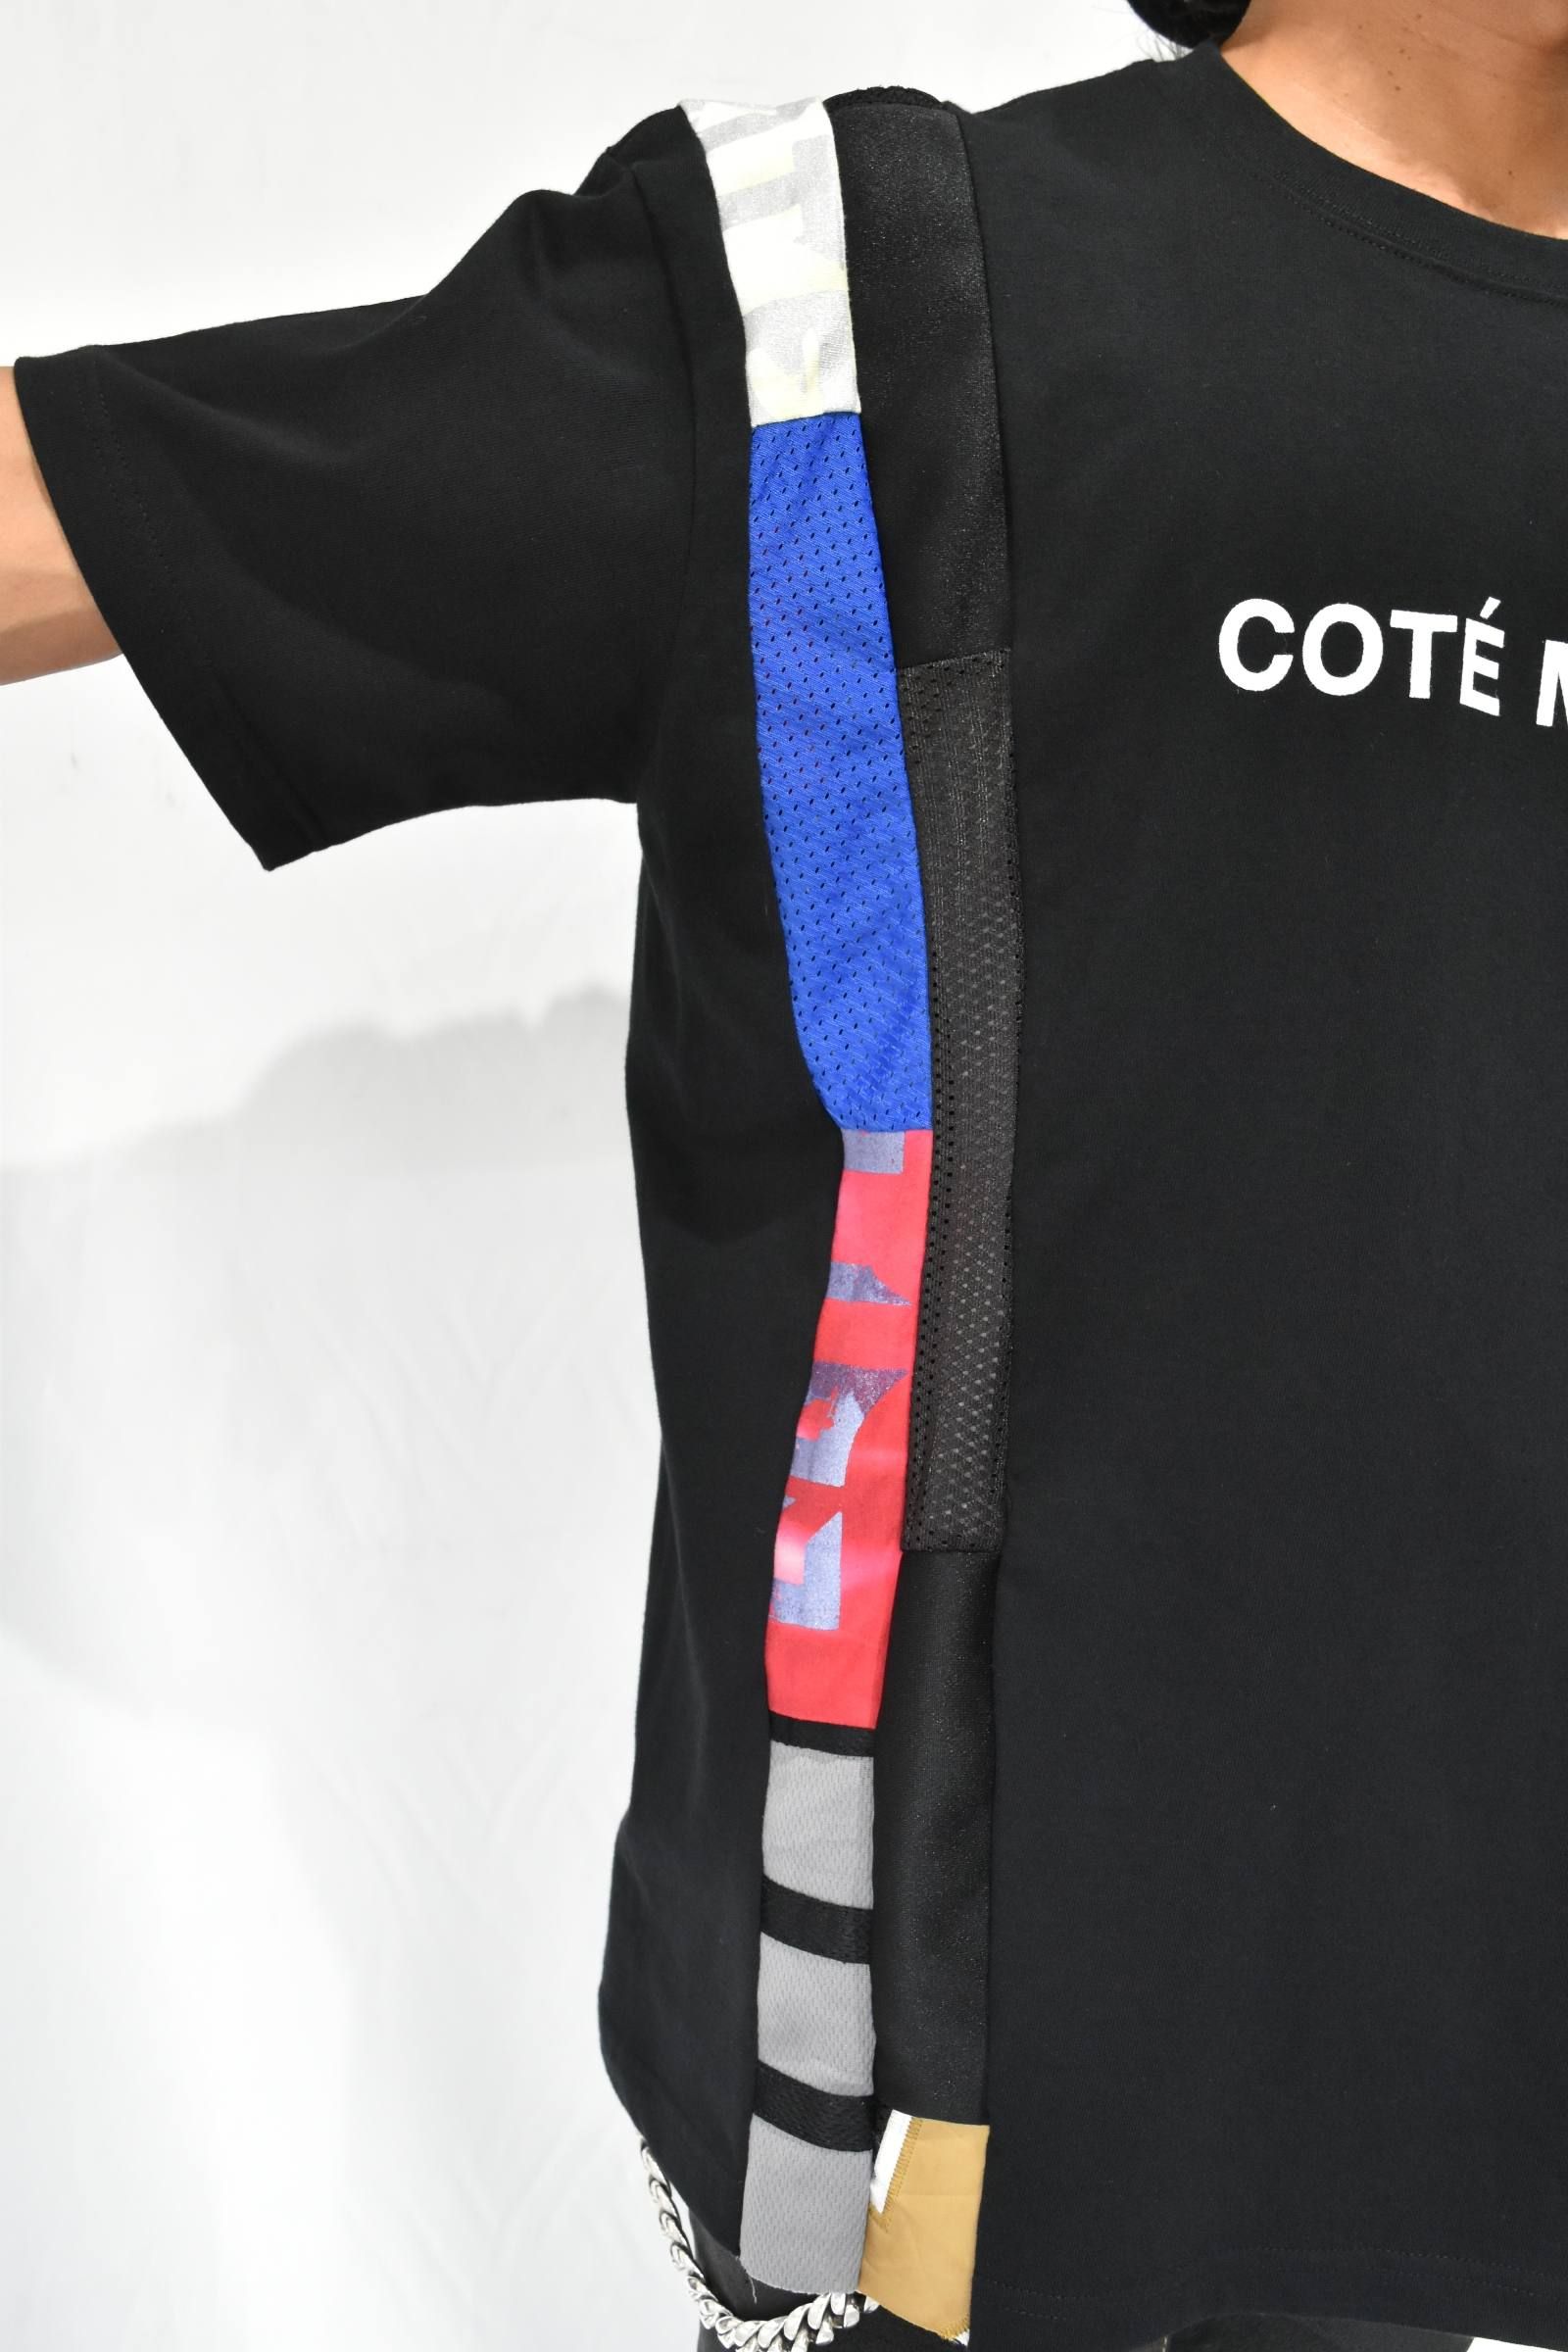 COTE MER - リメイク プリントTシャツ | chord online store